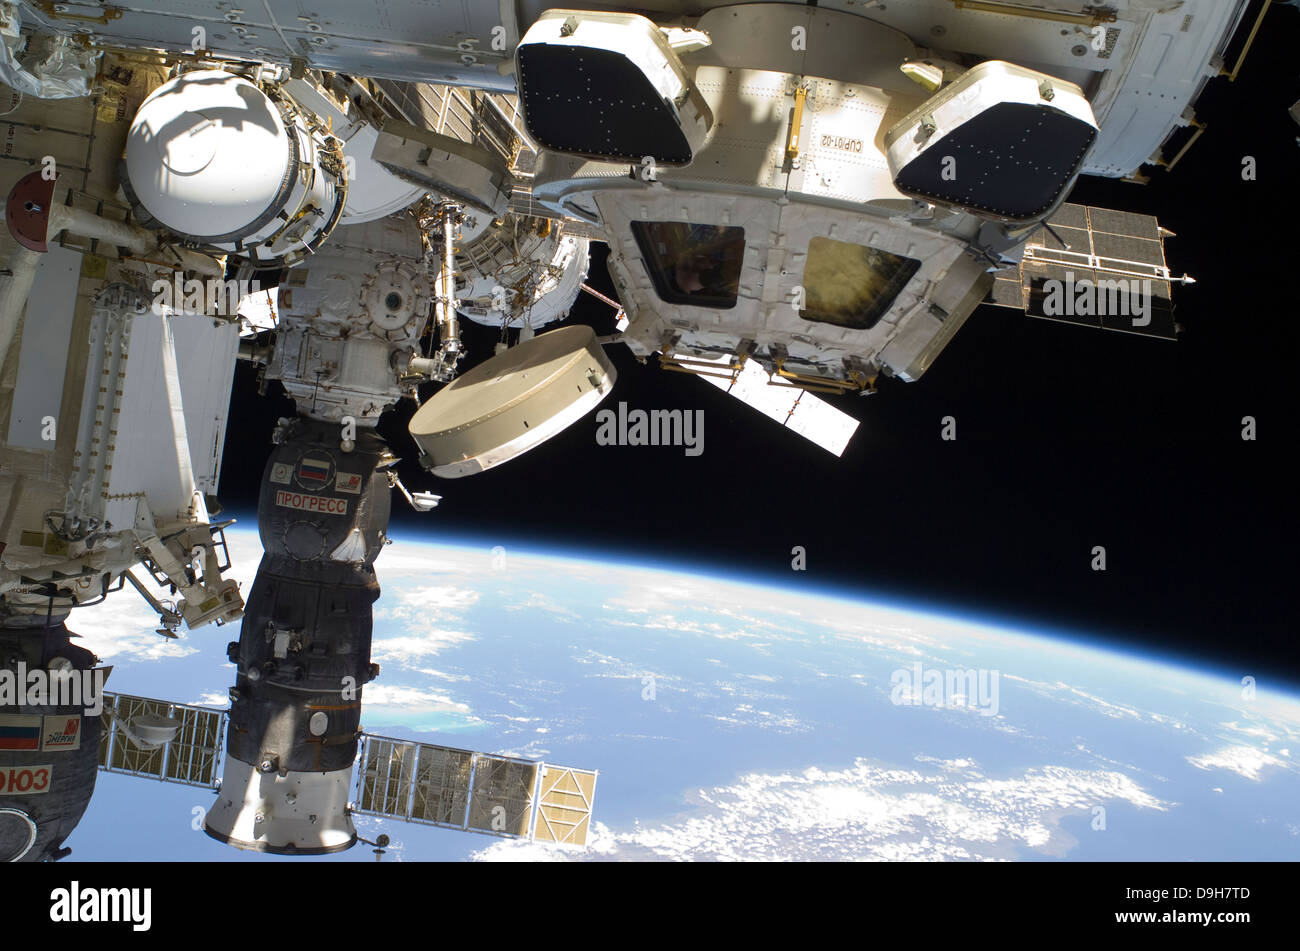 The Cupola of the International Space Station and a docked Russian Progress spacecraft. Stock Photo